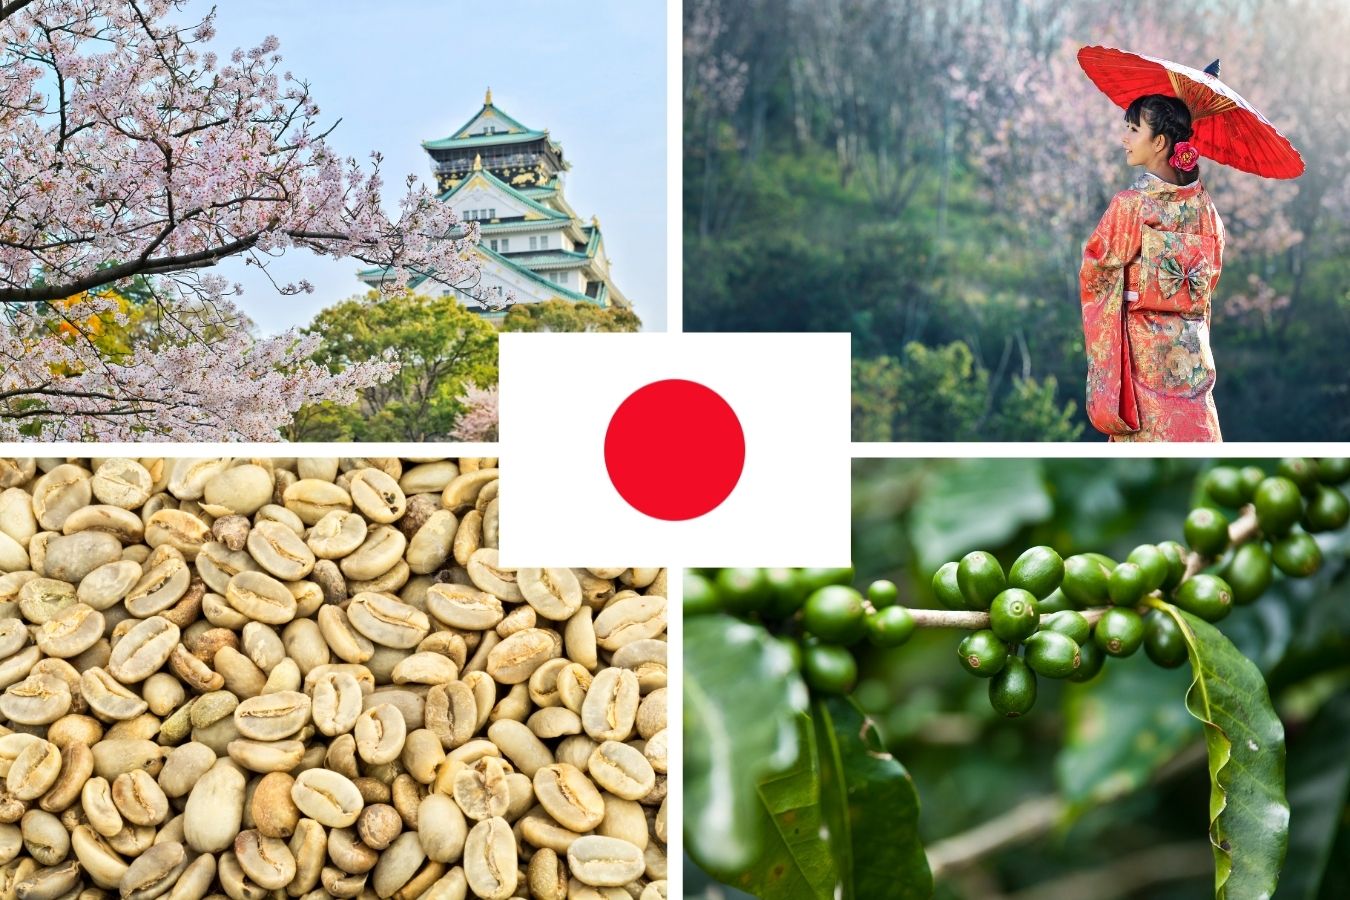 How to Export Coffee to Japan? Procedures For Exporting Coffee To Japan